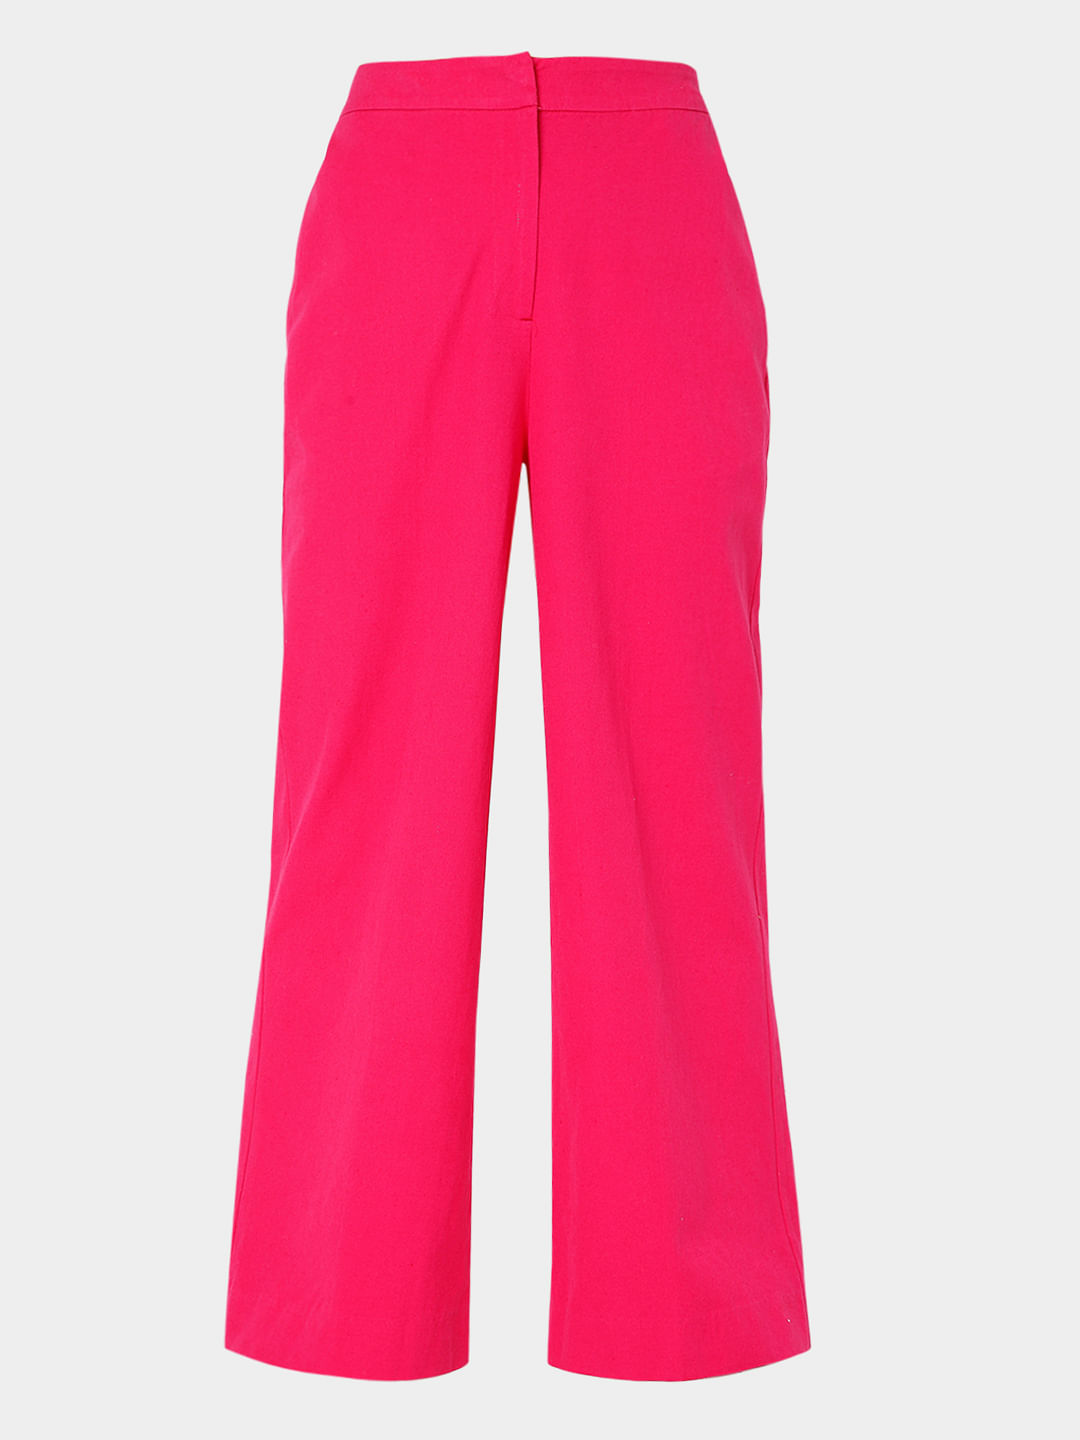 Syd  Ell Pink Wide Leg Trousers  In The Style